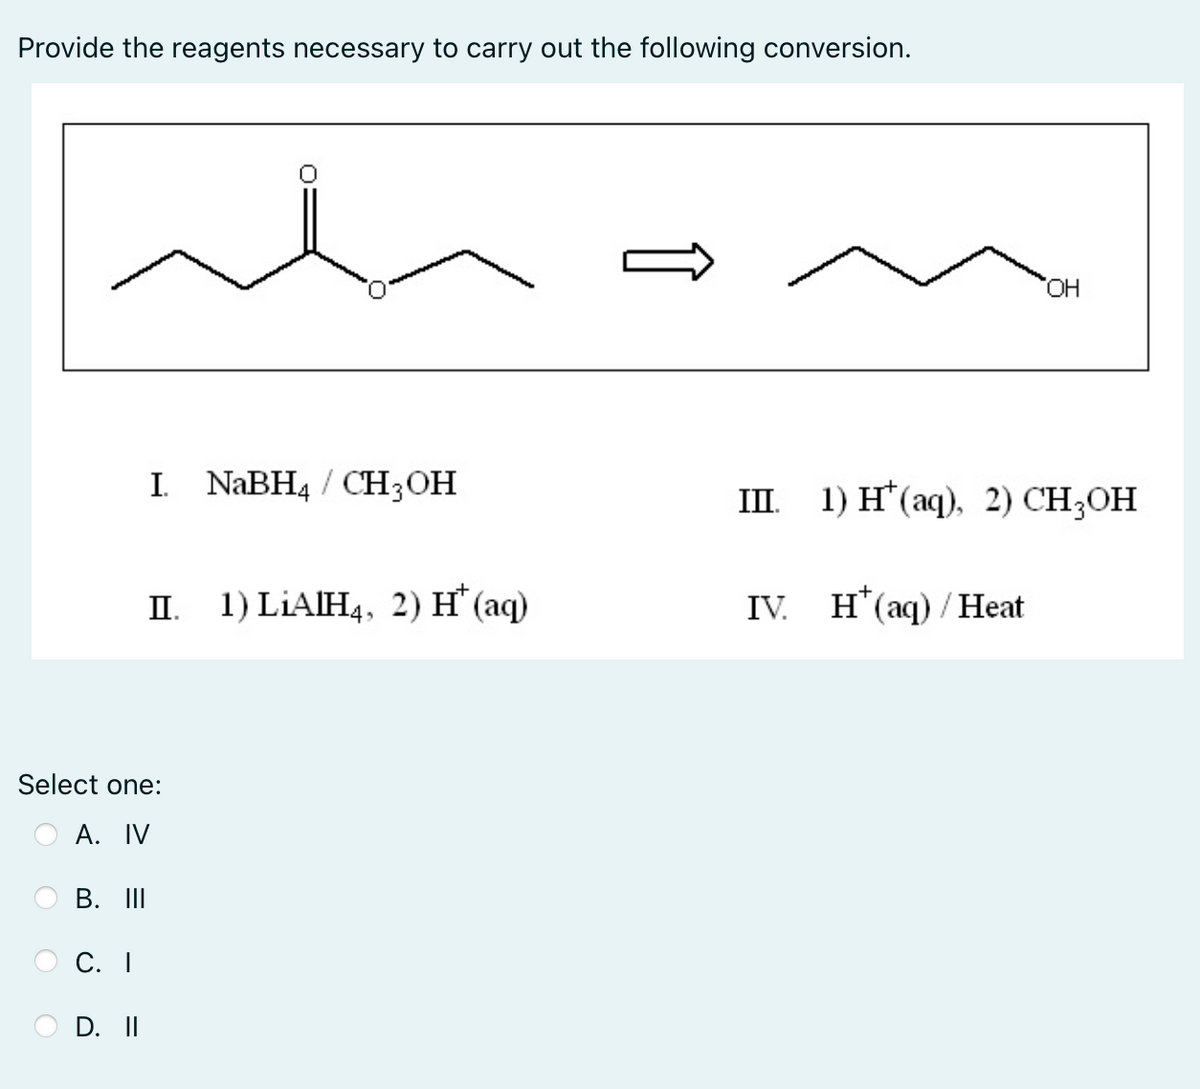 Provide the reagents necessary to carry out the following conversion.
I. NaBH4 / CH3OH
III.
II. 1) LIAIH4, 2) H* (aq)
IV. H* (aq)/Heat
Select one:
A. IV
B. III
C. I
D. II
OH
1) H(aq), 2) CH3OH